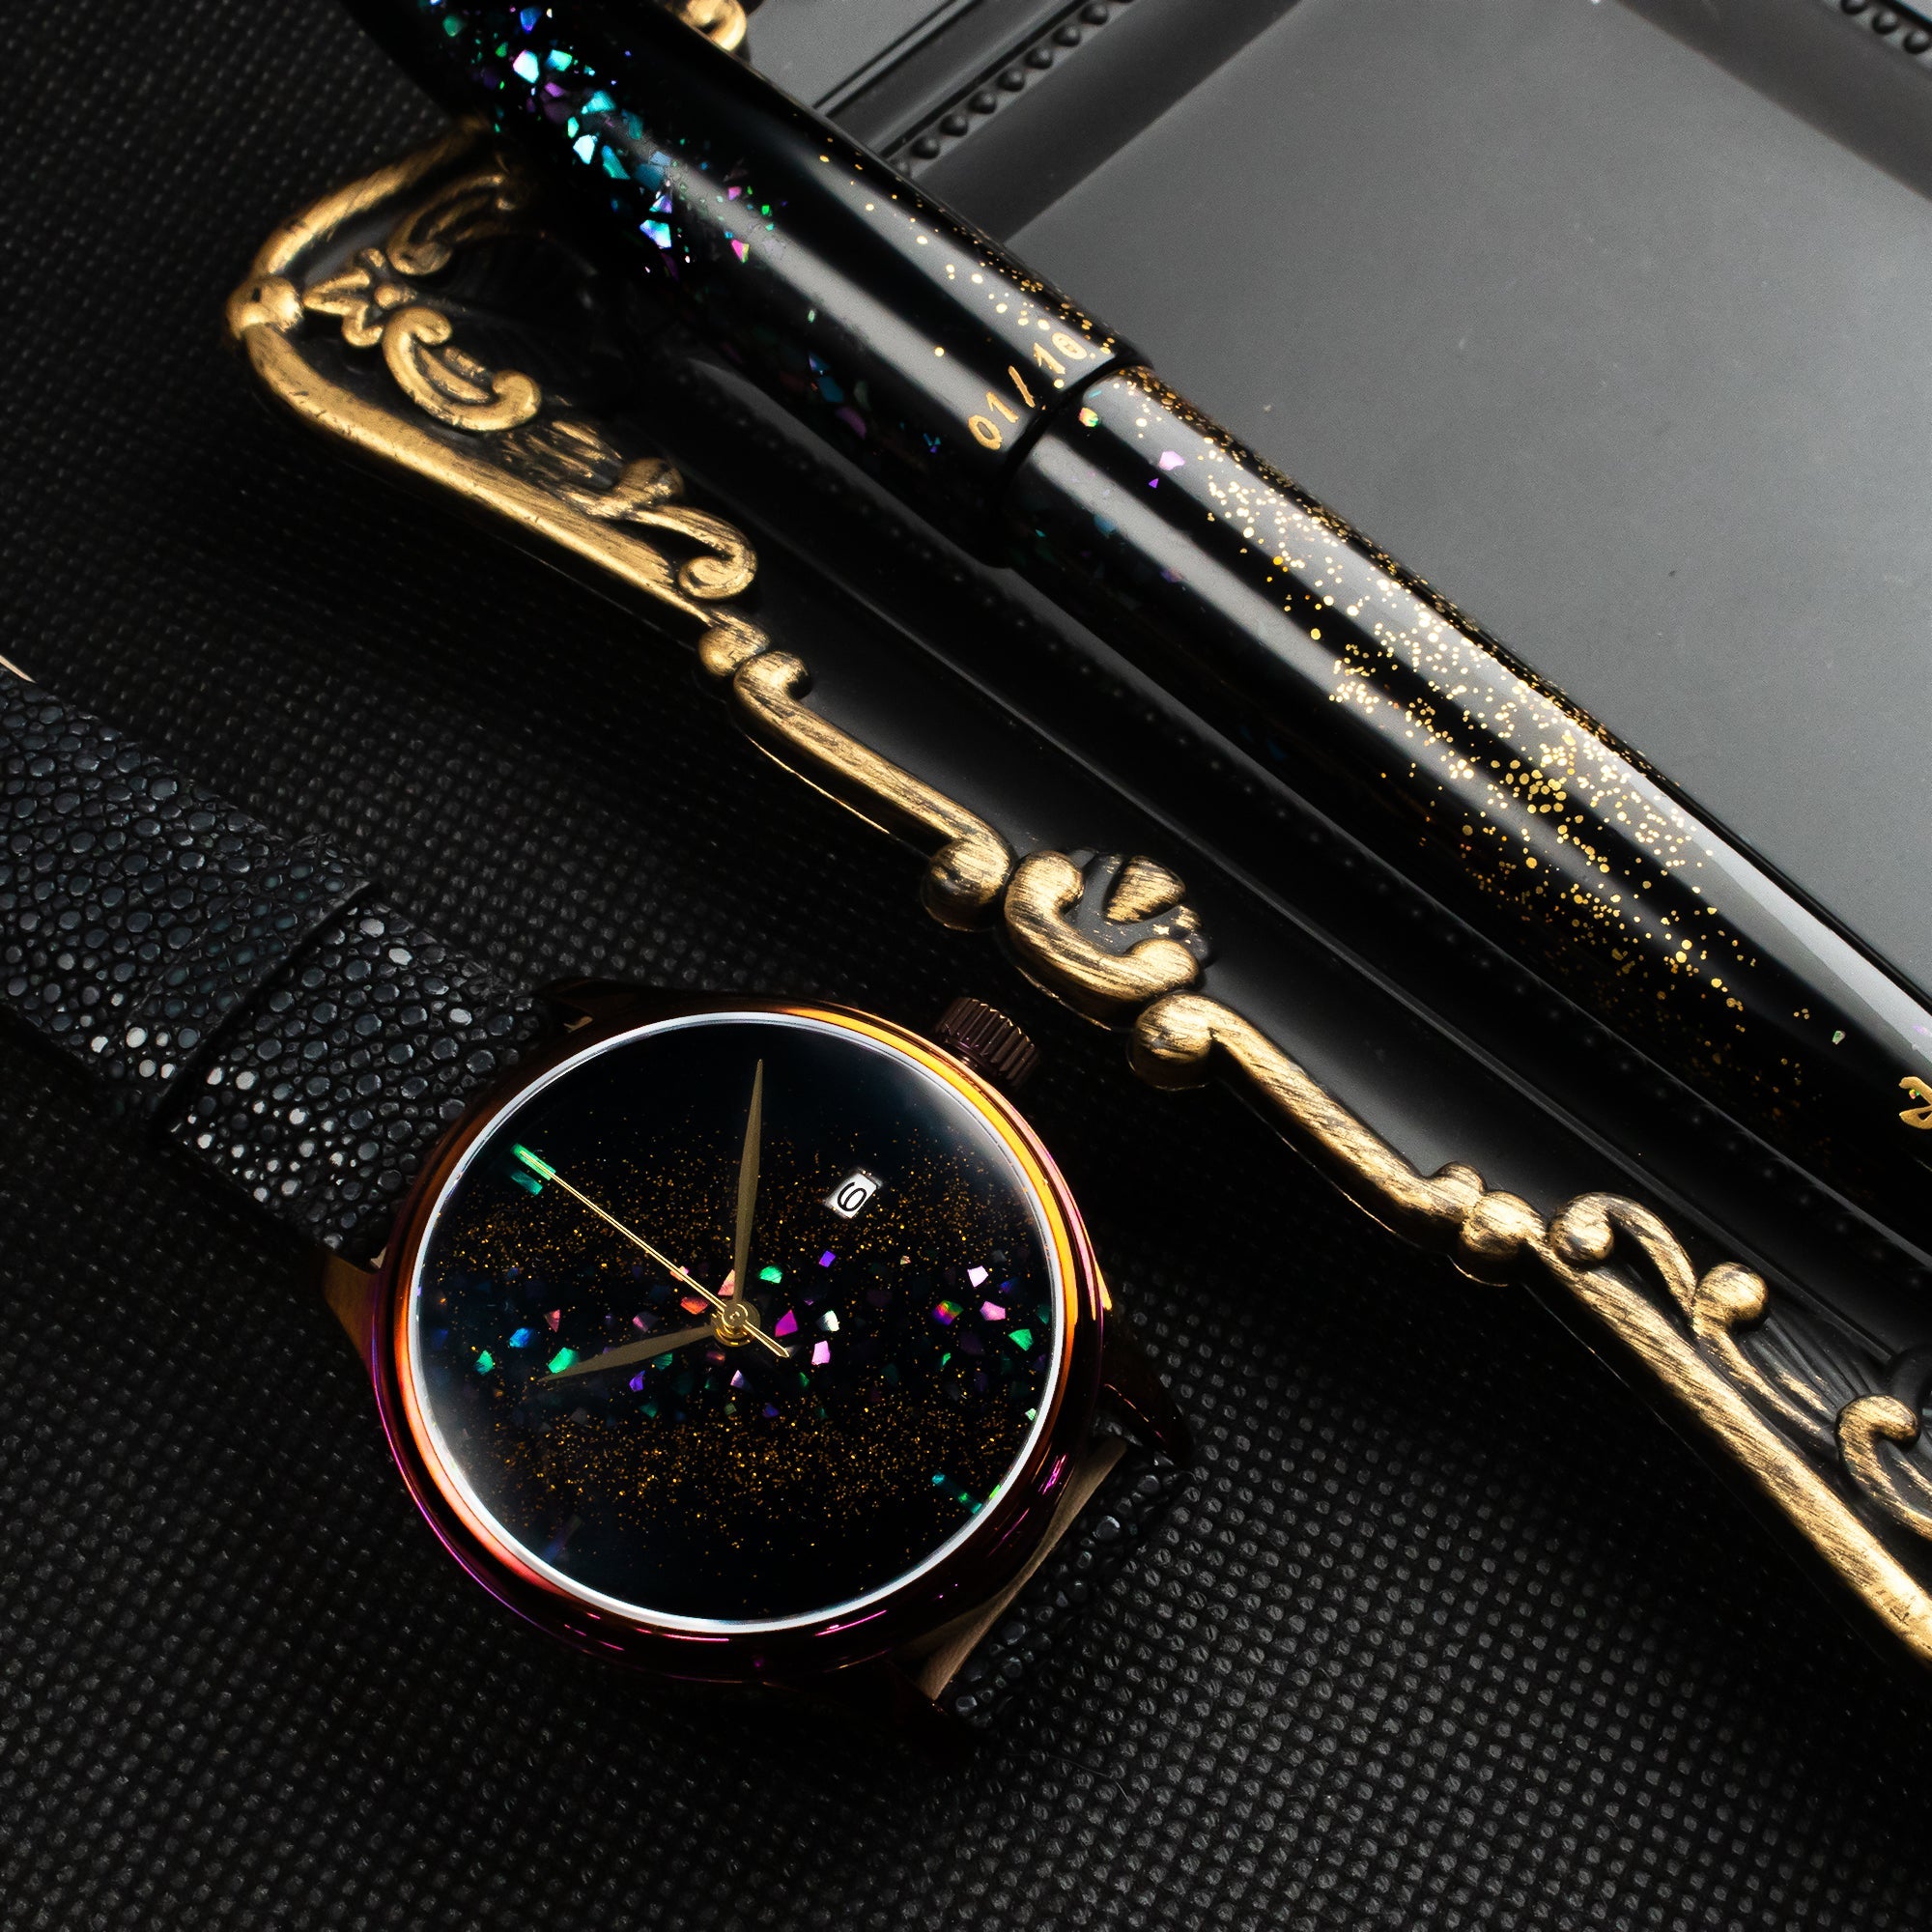 Dream Watch - Raden - Wancher Watch Wancher Watch Wancher Watch Dream Watch - Raden {{ Automatic Watch {{ Watch }} }} {{ Japan }} Wancher Dream Watch - Raden, featuring a beautifully crafted Raden Urushi dial with a shining, iridescent finish. The watch is powered by Miyota 9015 Mechanical Movement and features a Domed Sapphire Glass and Genuine Cowhide/Galuchat strap